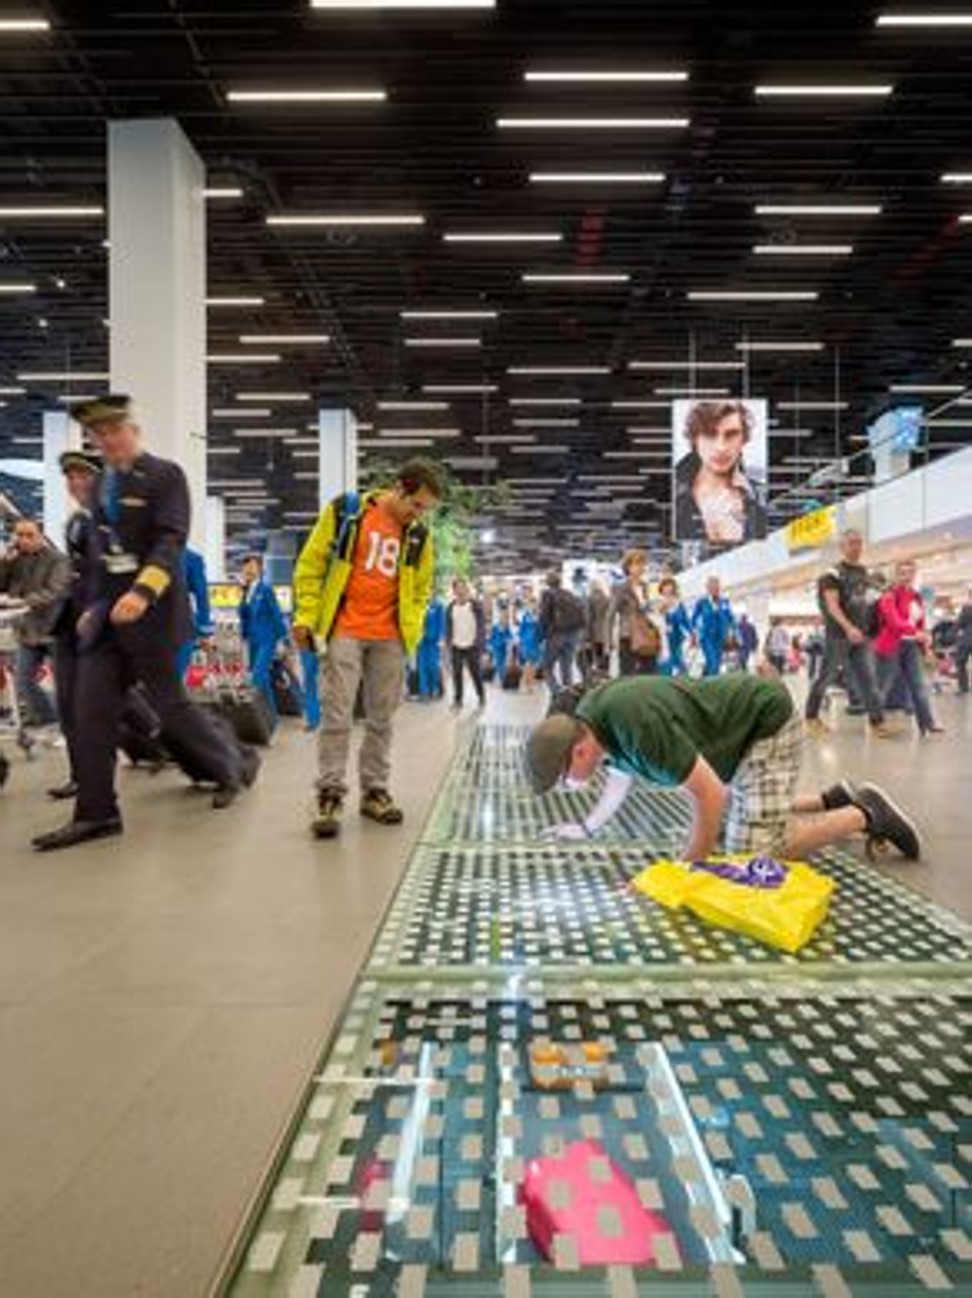 At Amsterdam Schiphol Airport, passengers in the terminal get a look at the baggage conveyor system through a clear panel in the floor. Photo: Thijs Wolzak